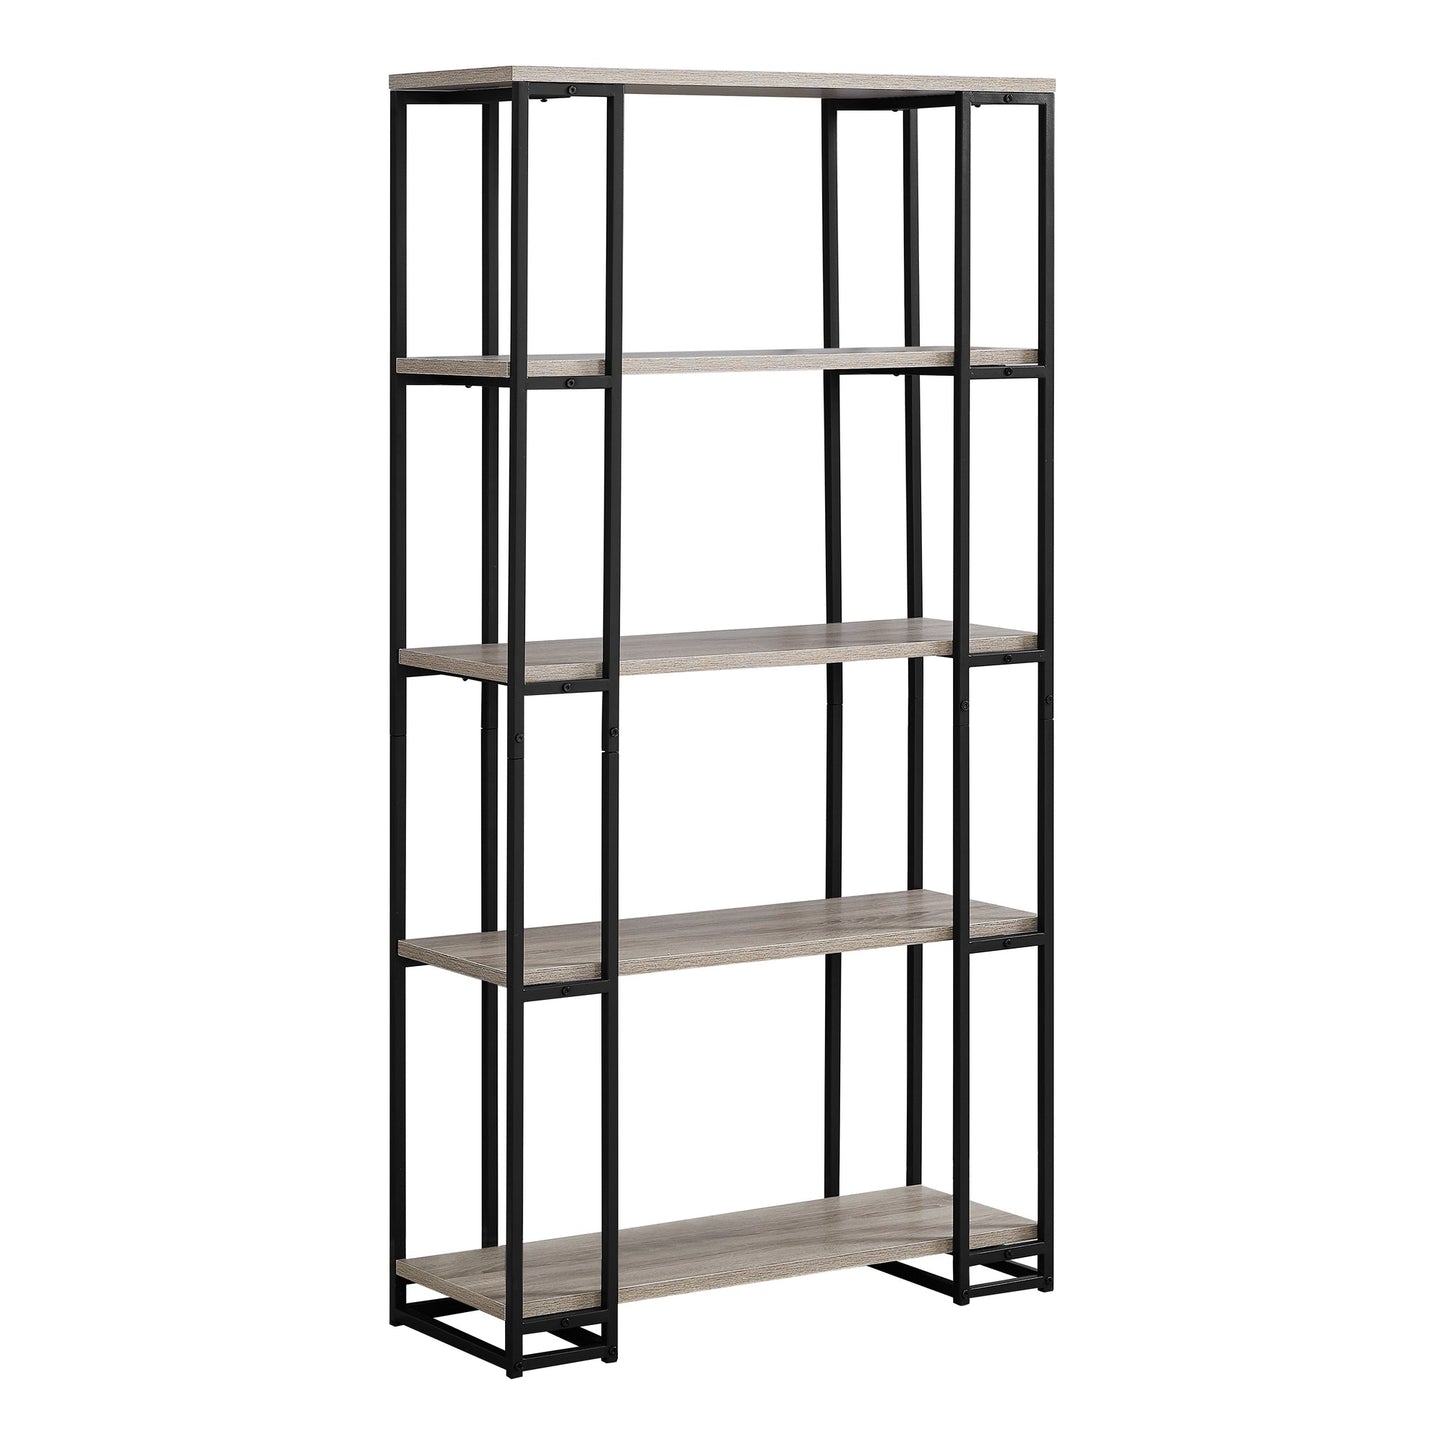 60"H 4-Tier 5 Shelf Metal and Wood Bedroom Bookcase in Dark Taupe